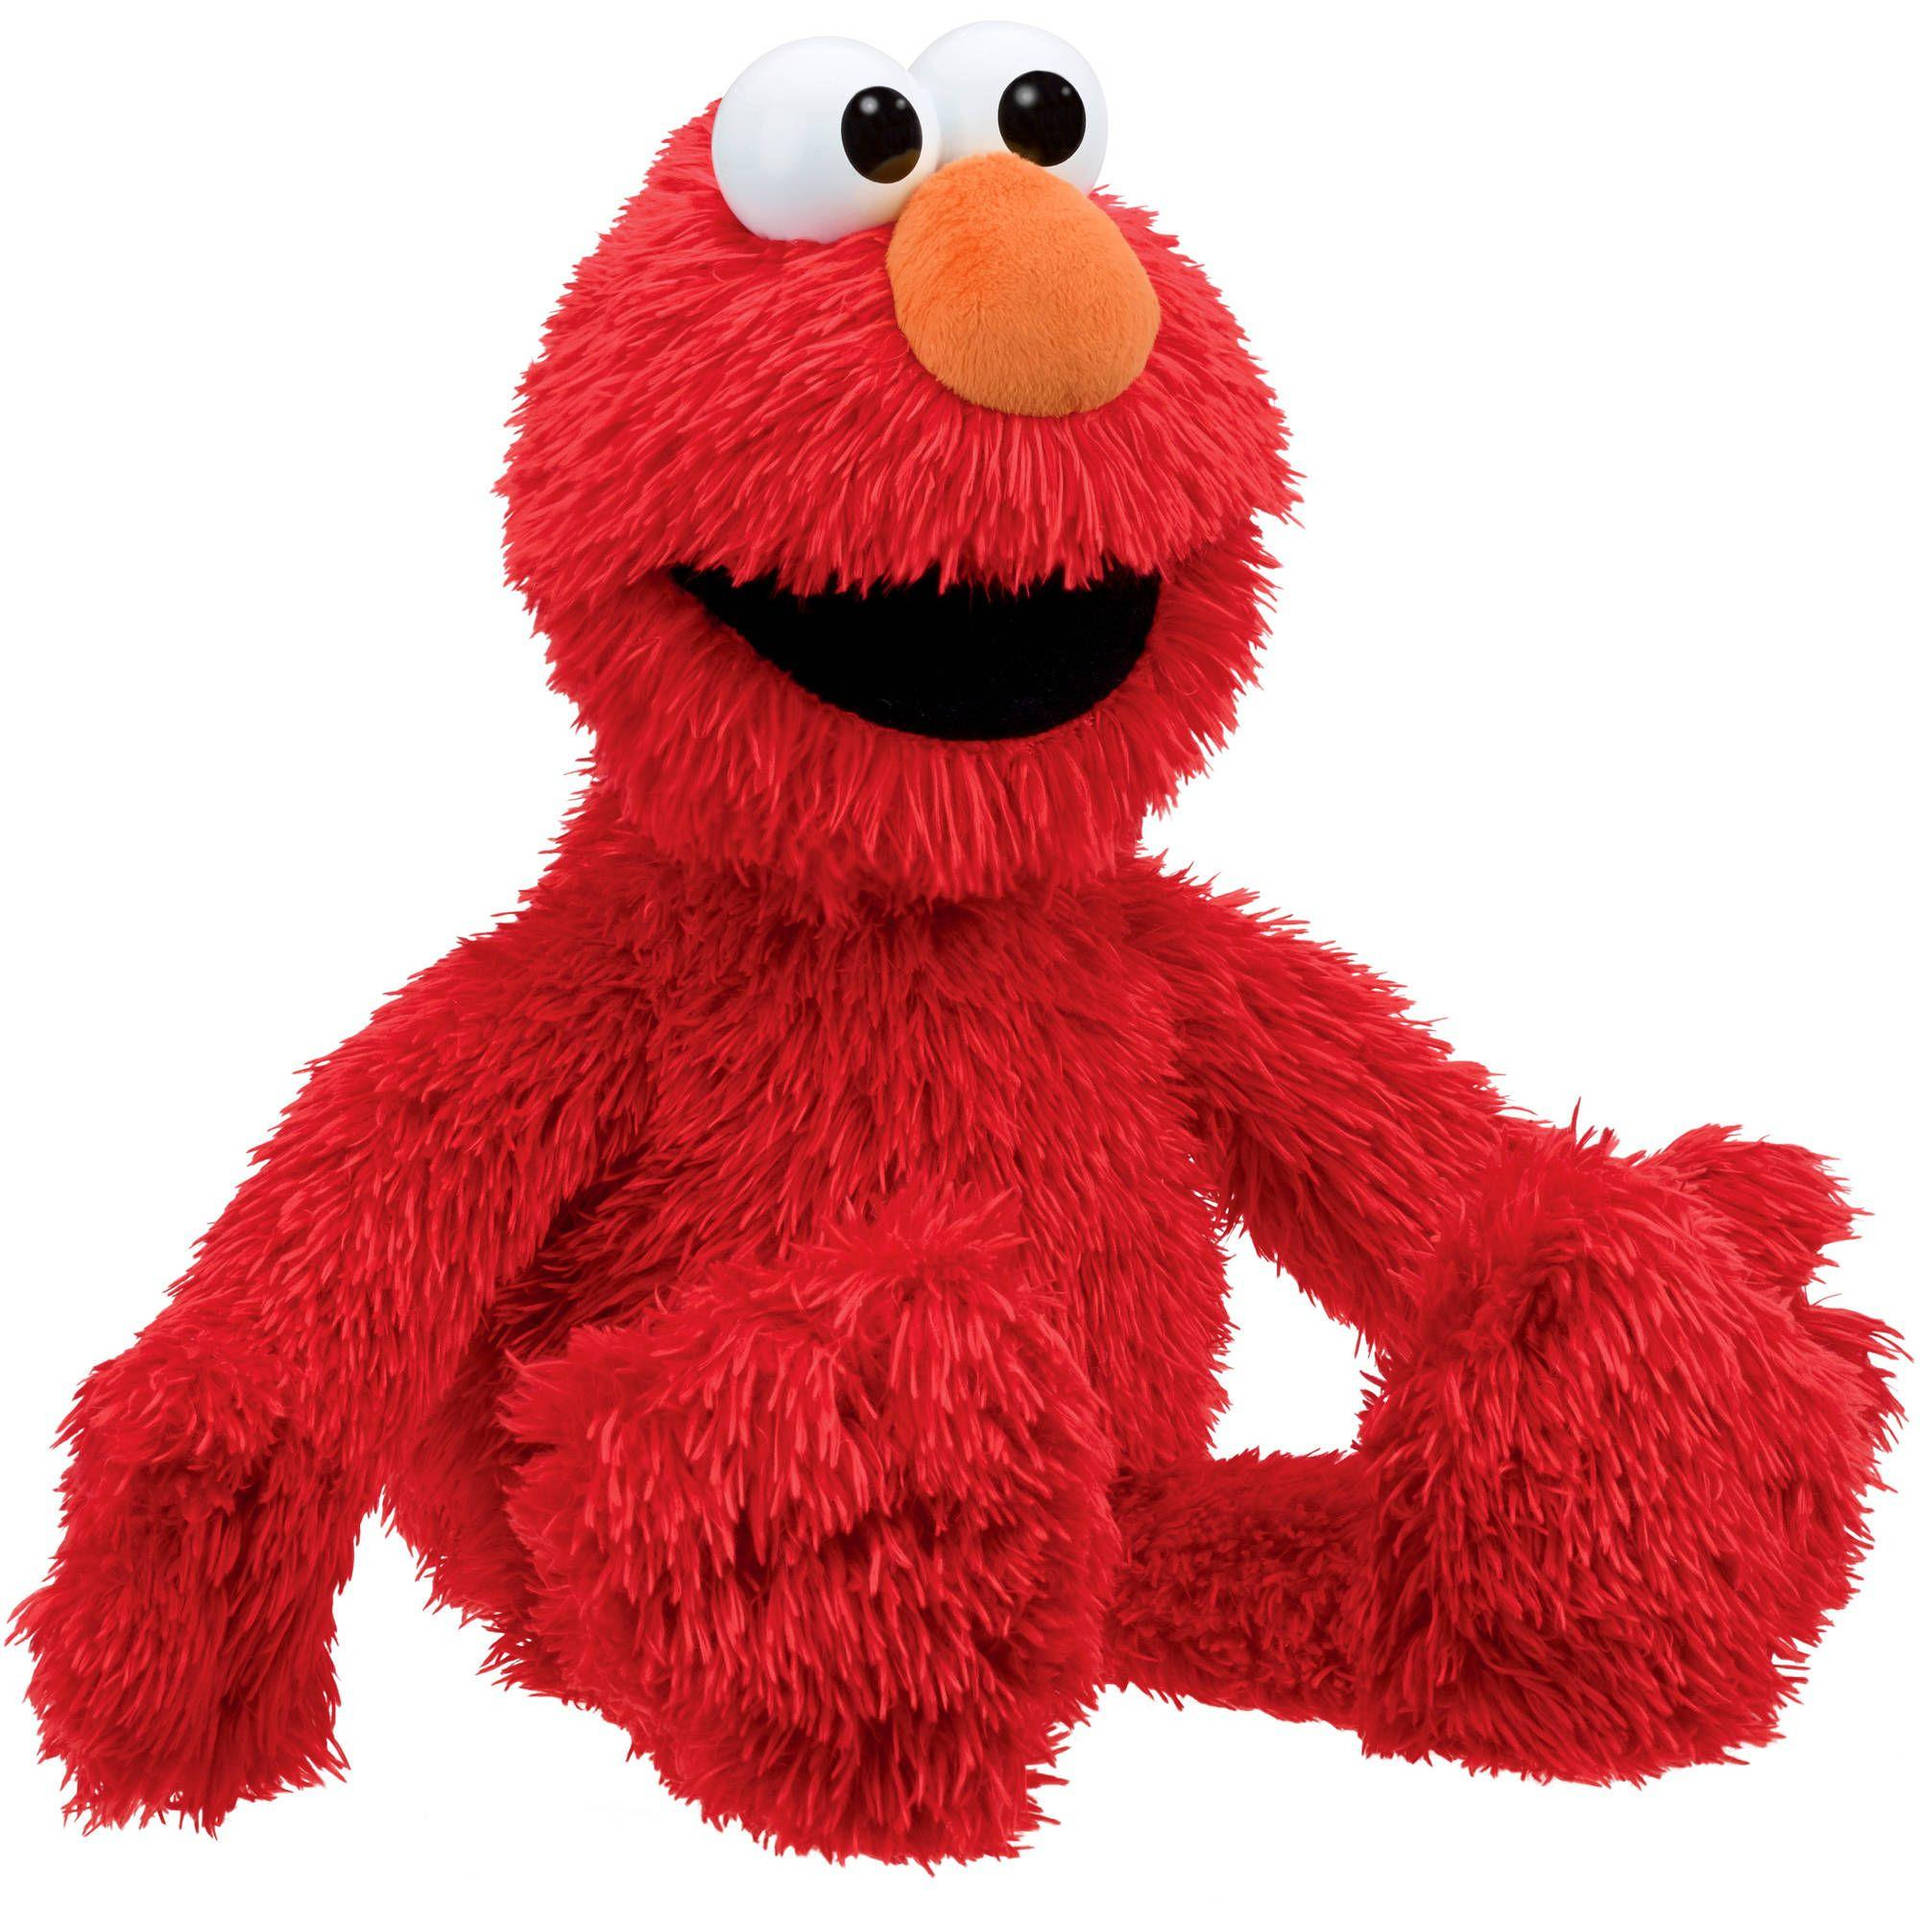 Elmo The Red Muppet